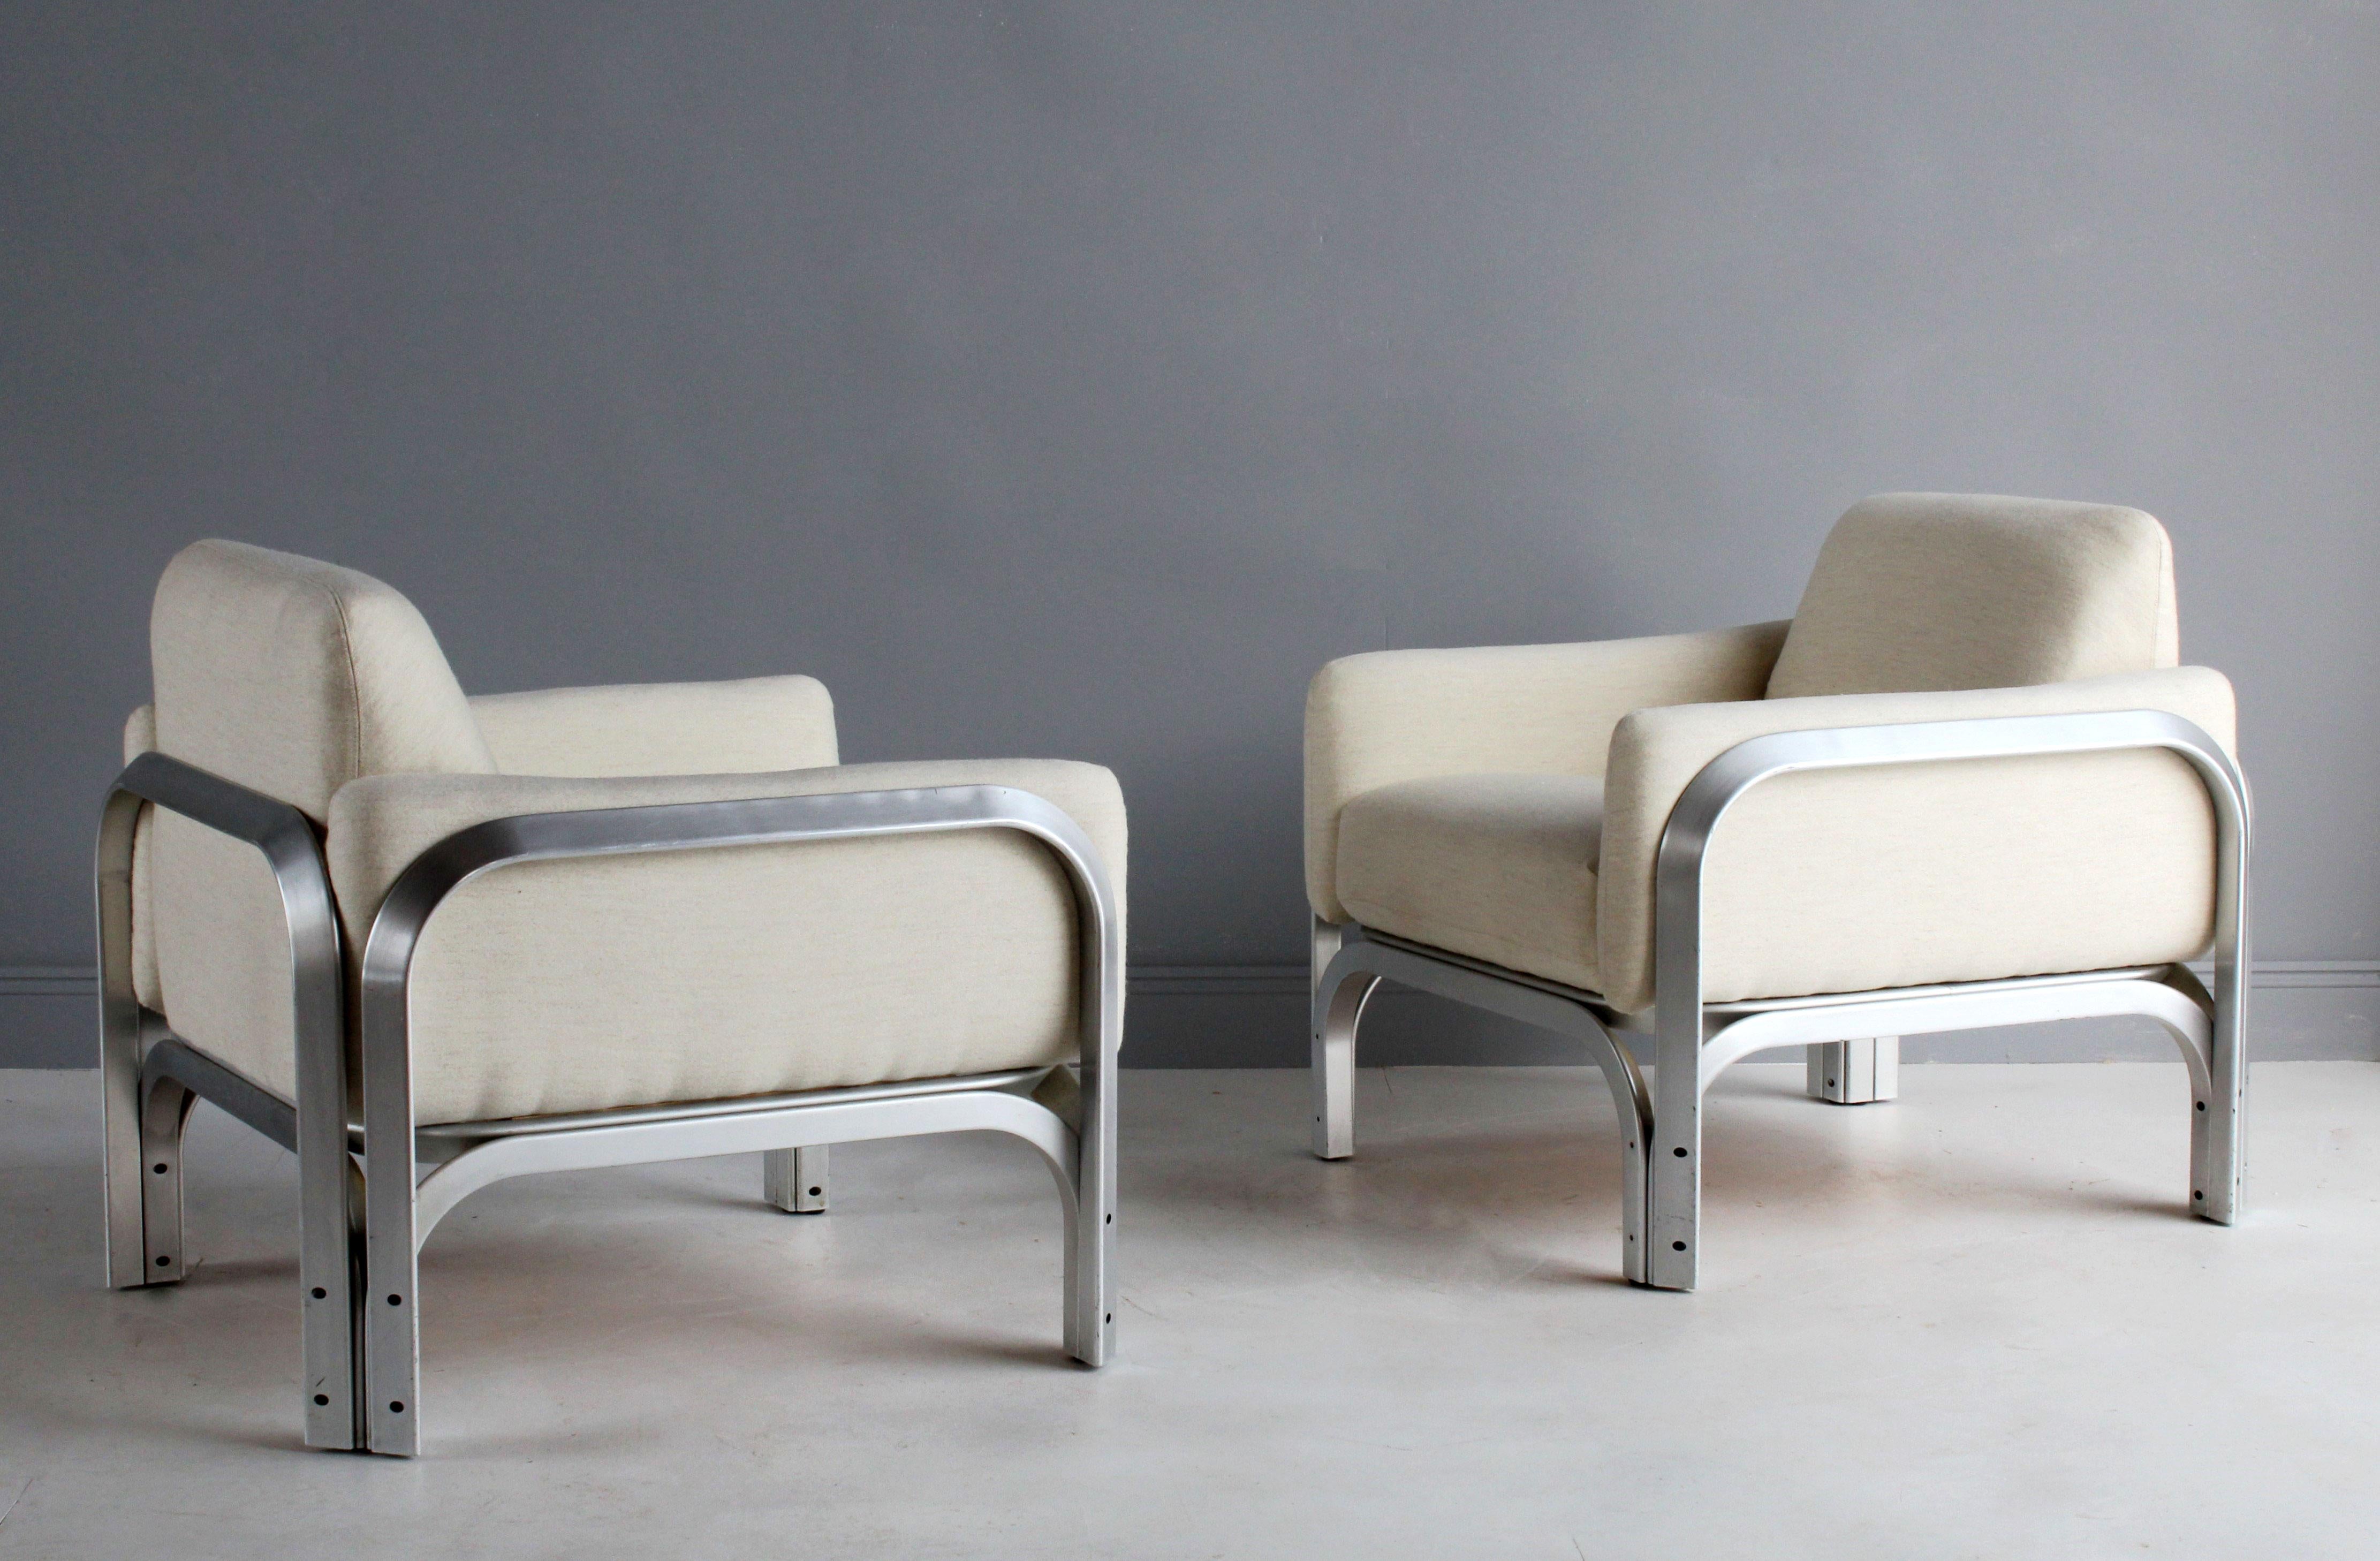 A pair of lounge chairs designed by Jørn Utzon in 1965 and intended for use in the foyers of the Sydney Opera House. Produced by Fritz Hansen in very limited numbers and first shown at the Cologne Furniture Fair in 1968. Of the few examples in